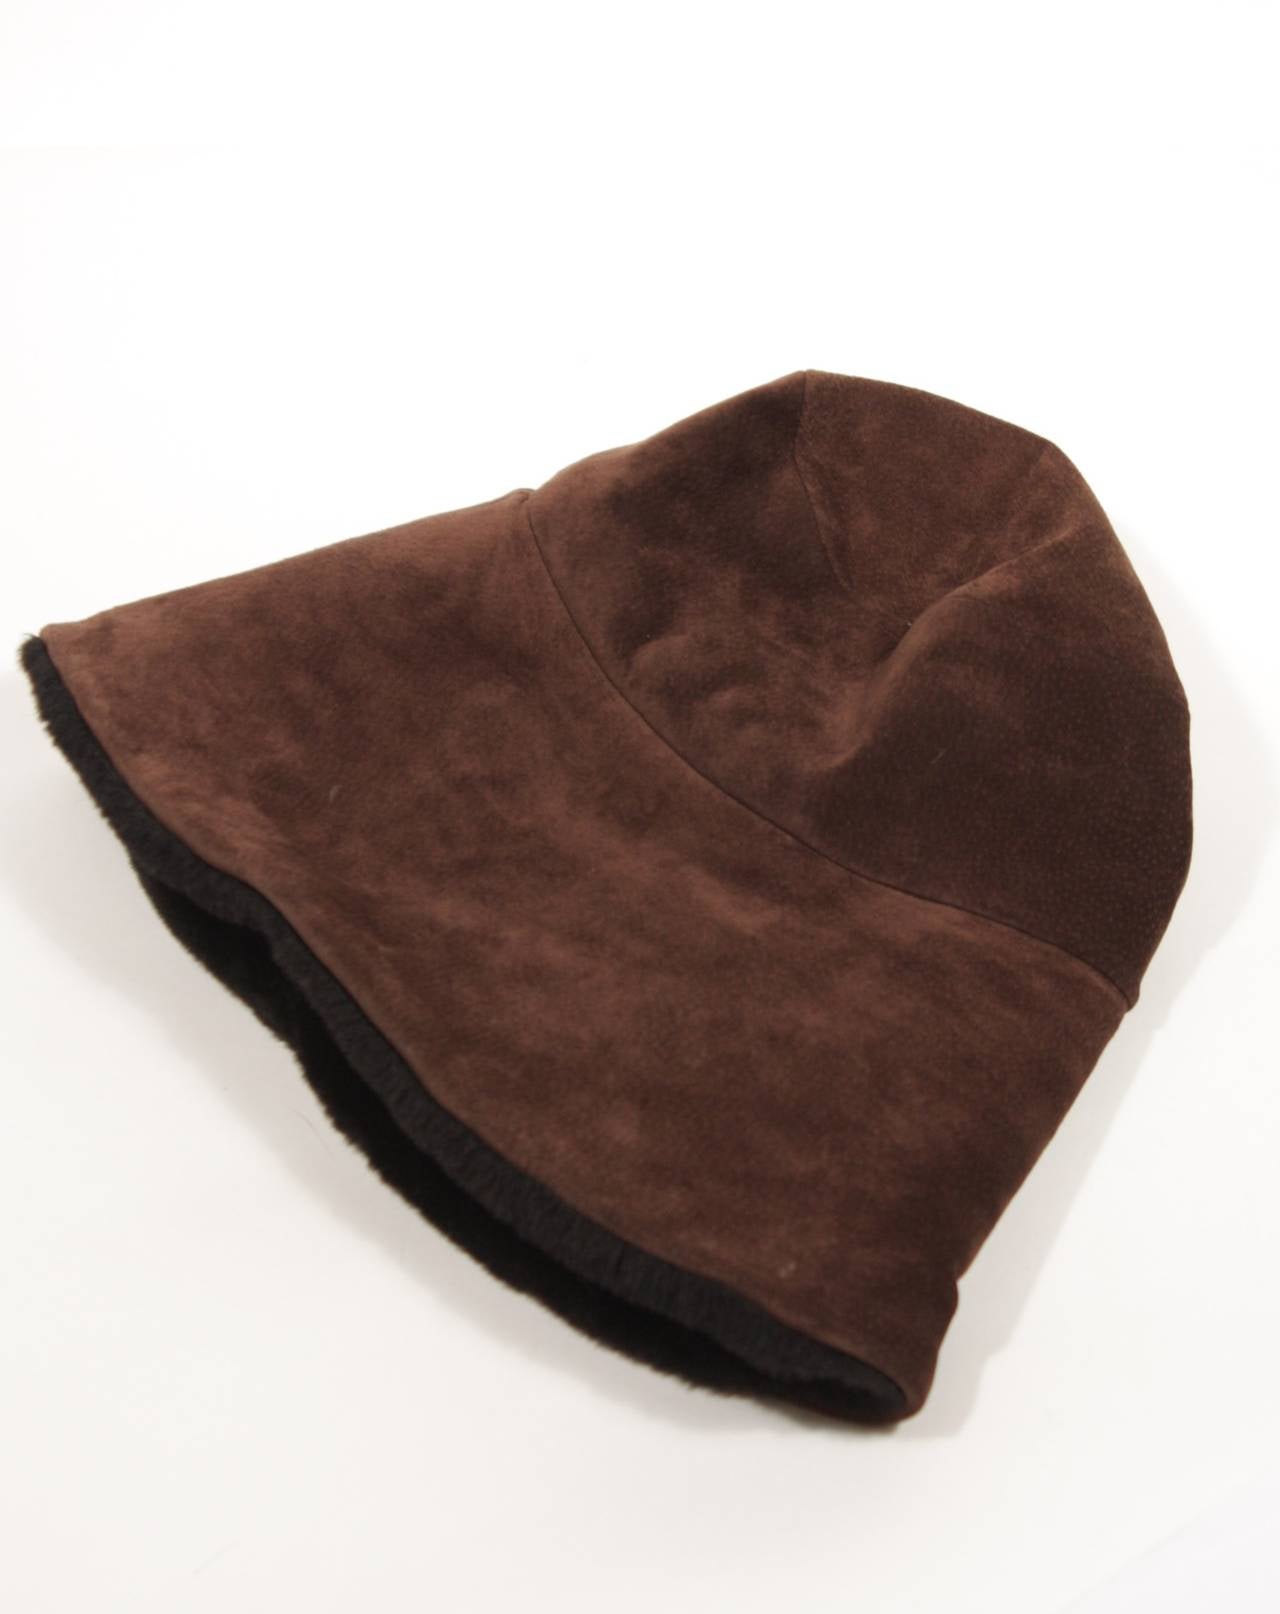 Yves Saint Laurent Brown Suede Hat with Black Sherling Interior 4